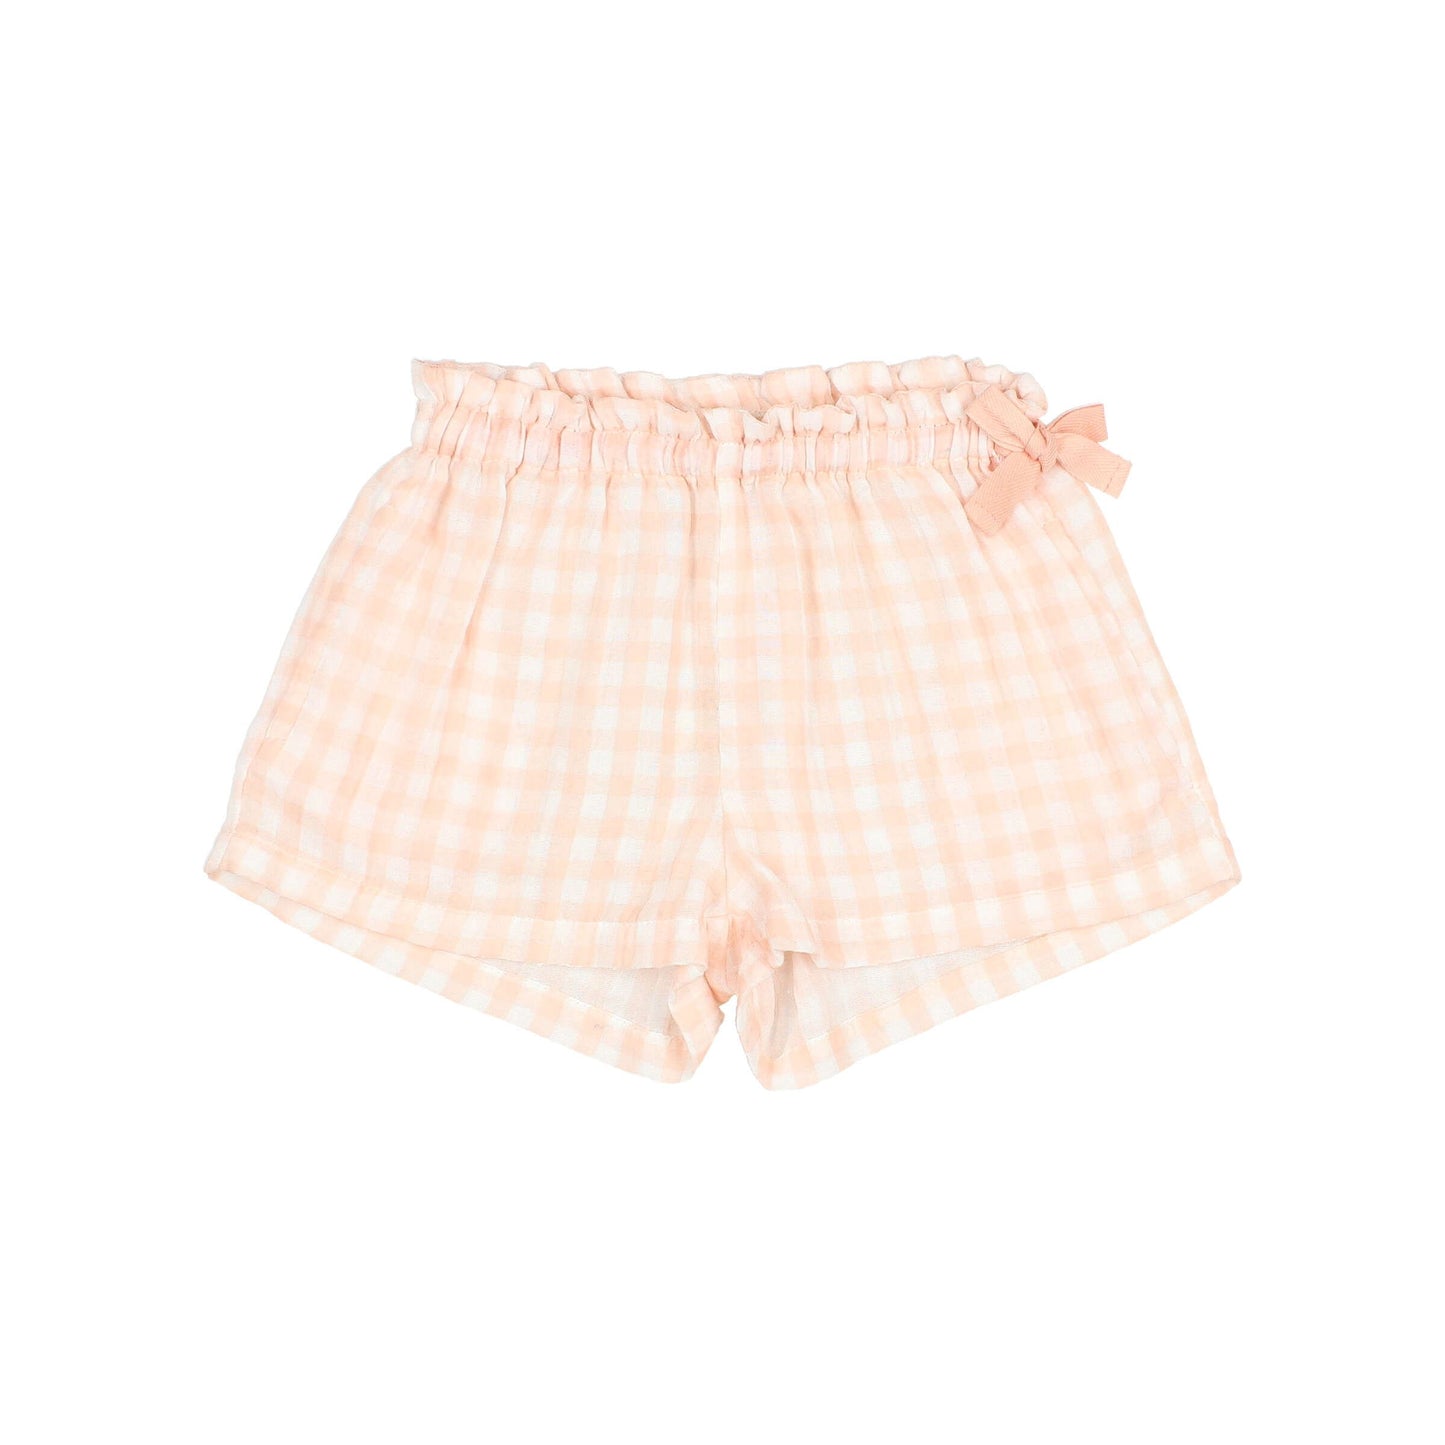 Gingham Muslin Shorts in Light Pink